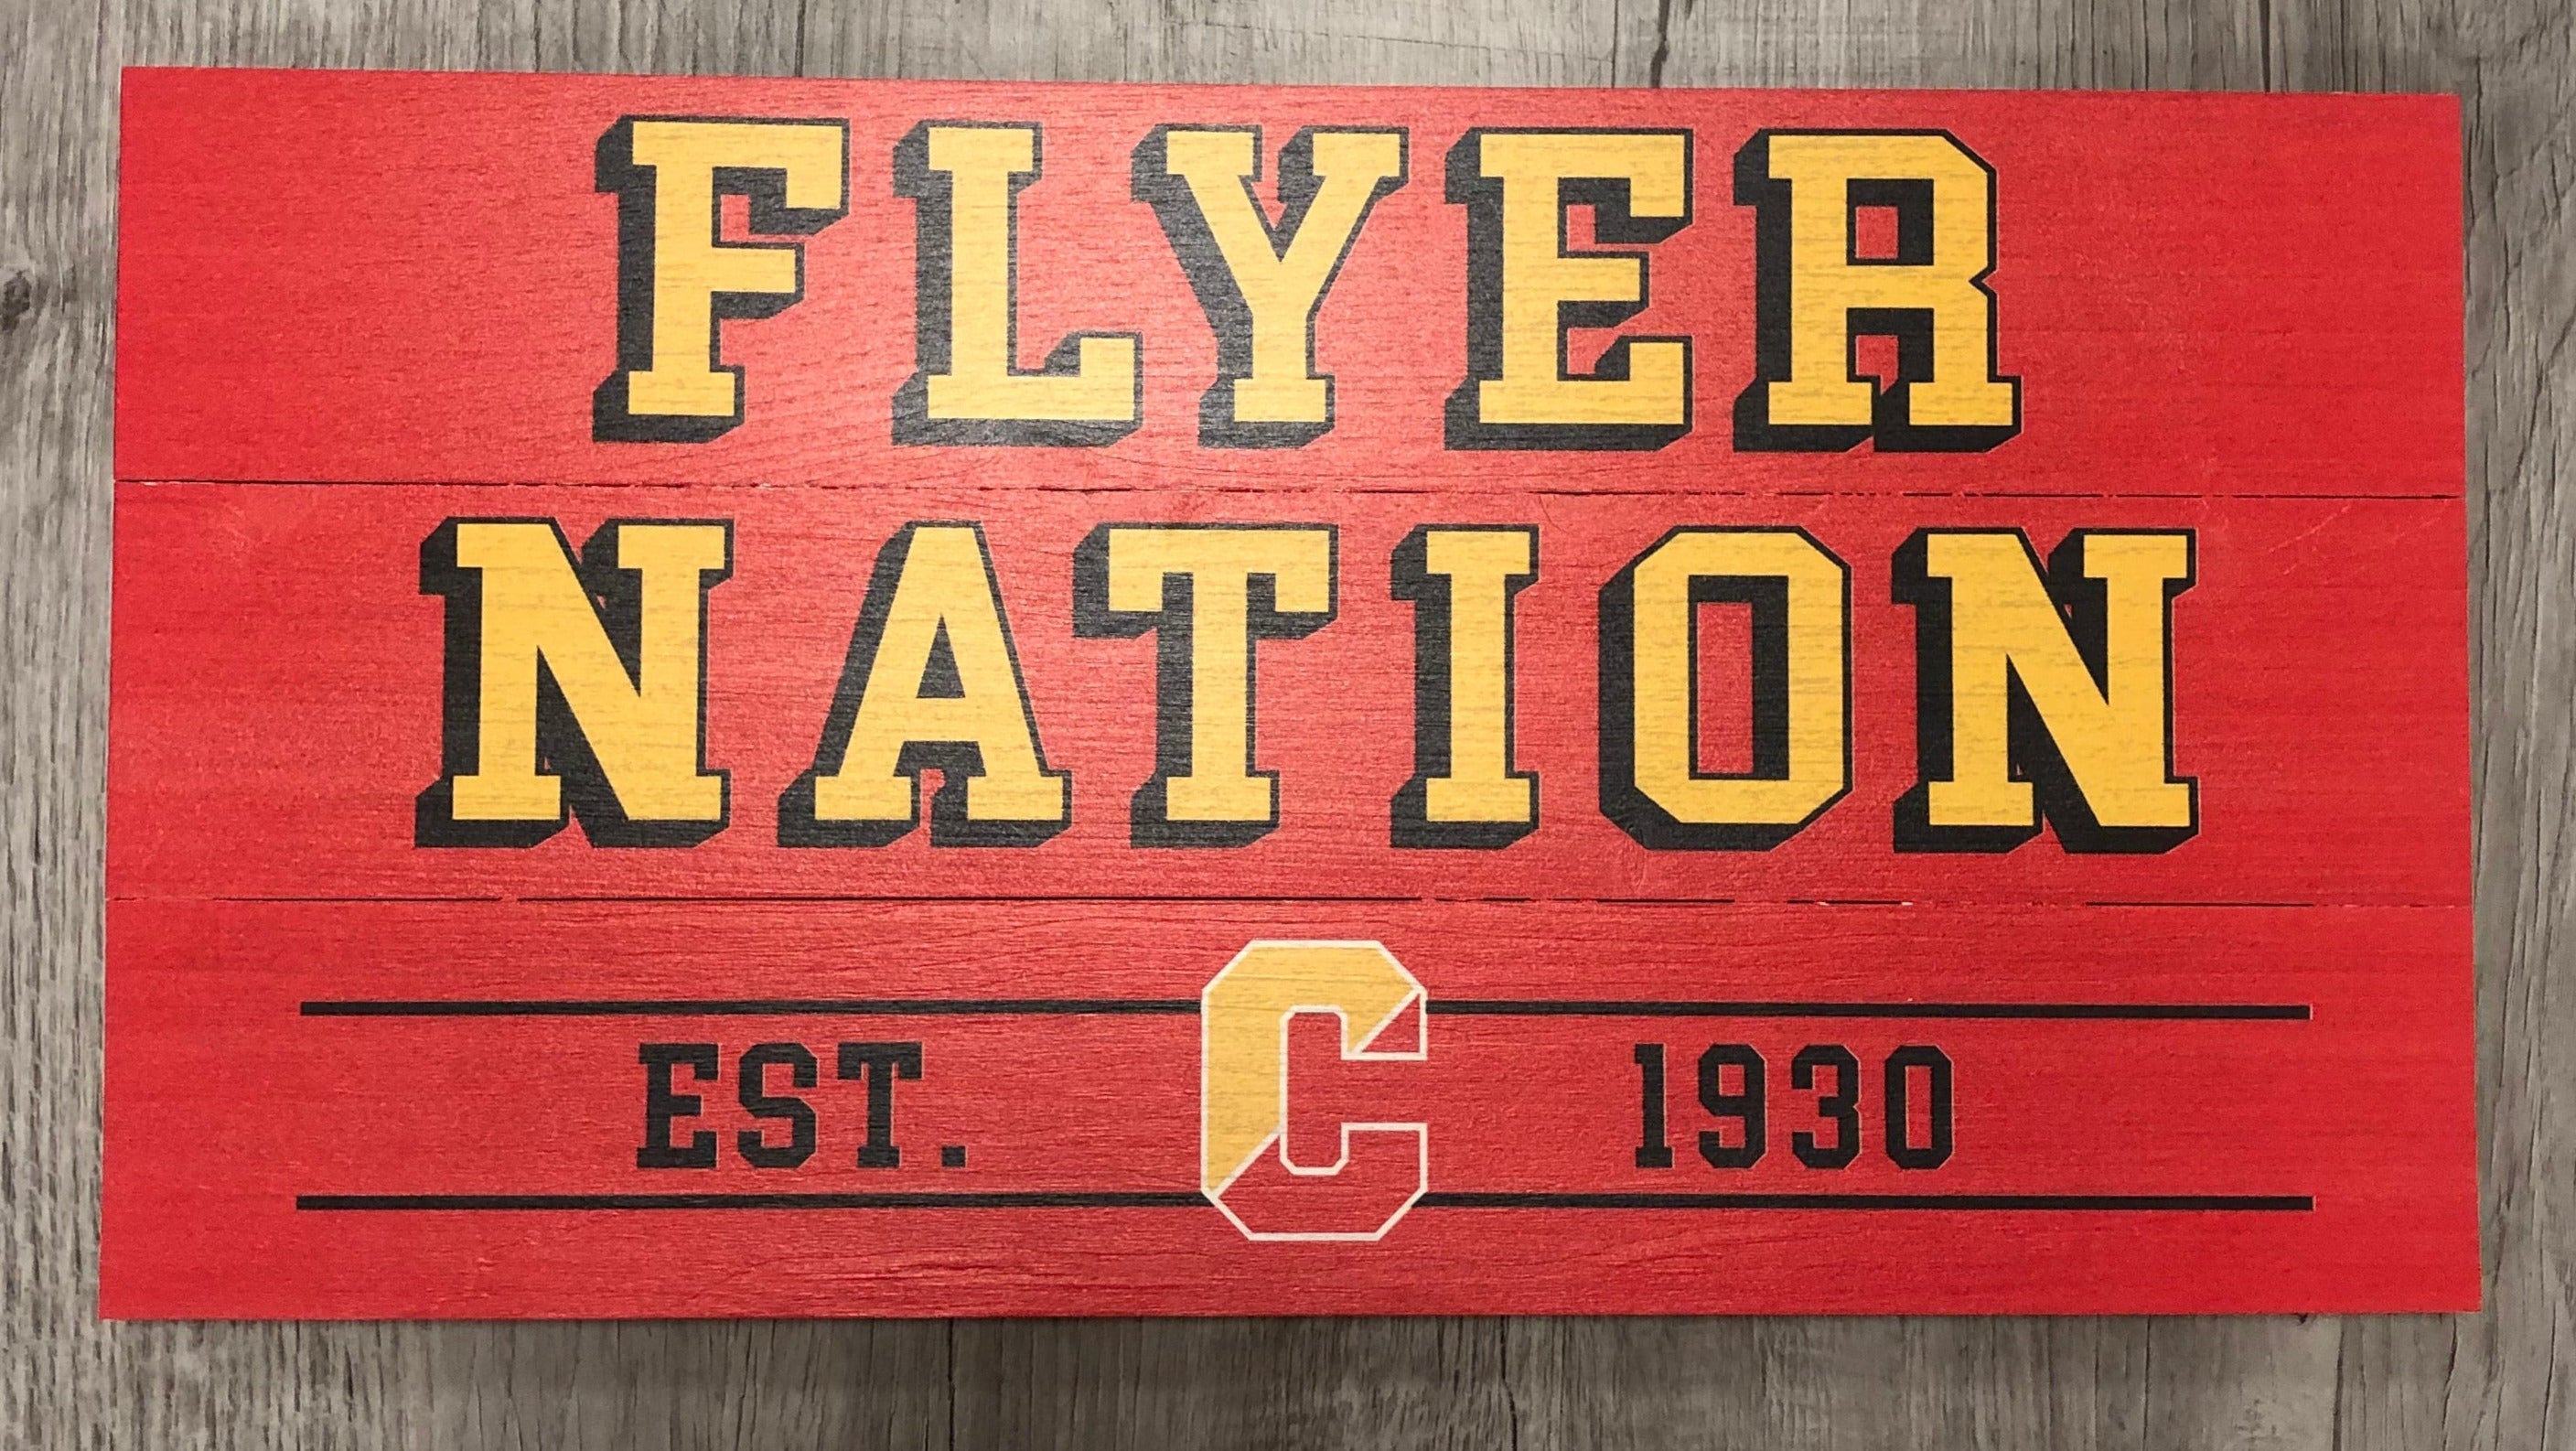 Legacy Flyer Nation Wall Sign